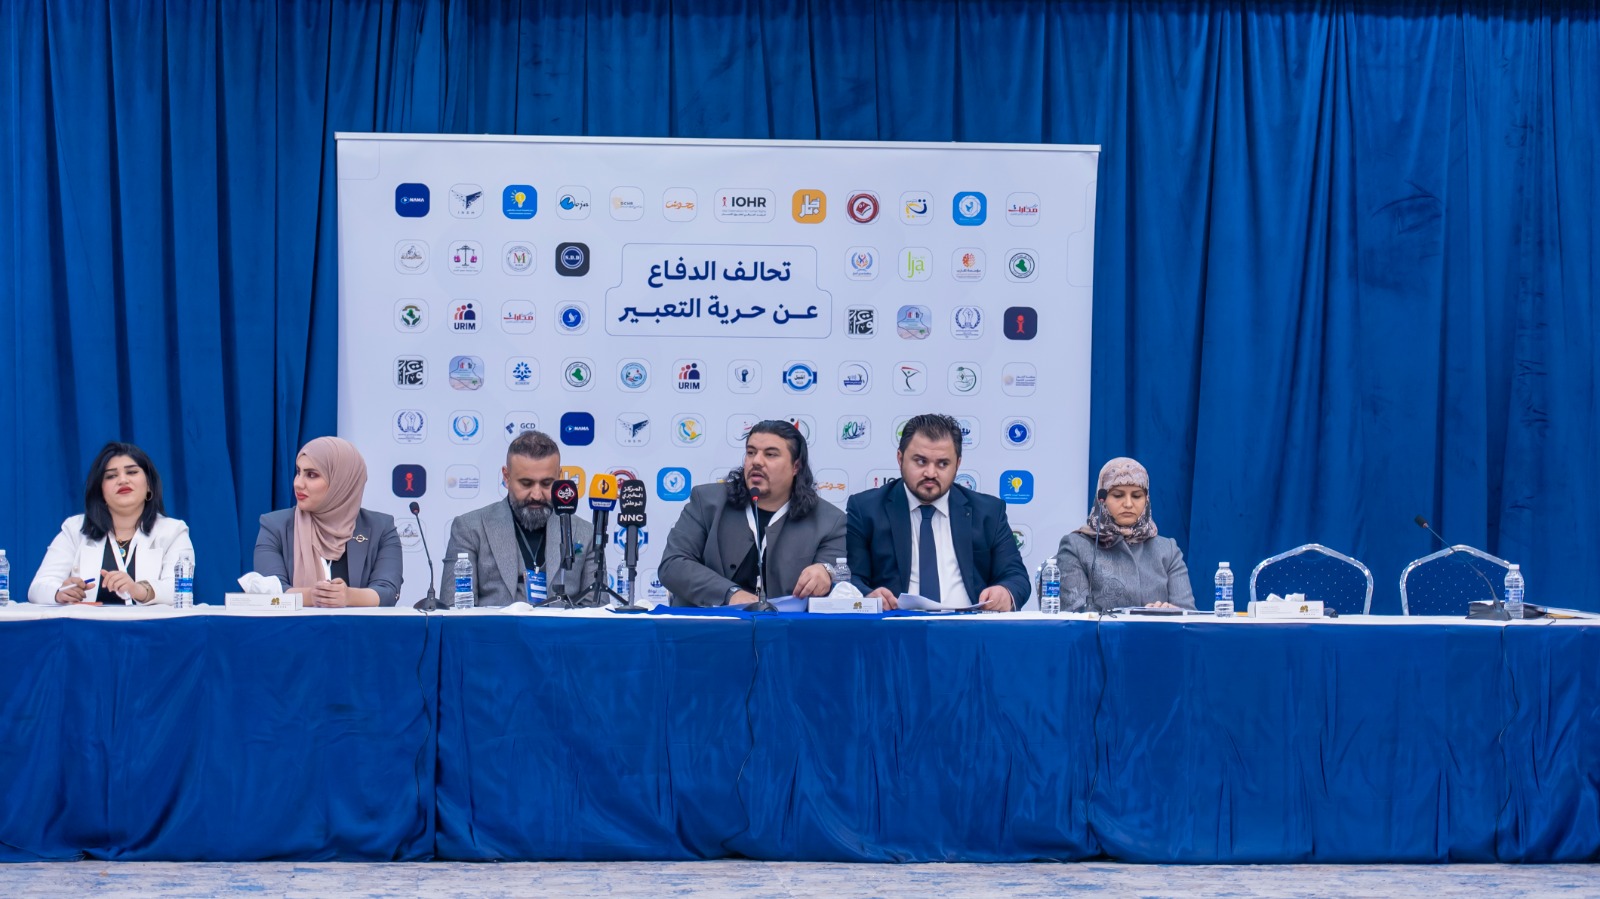 A coalition formed in Baghdad to defend freedom of expression